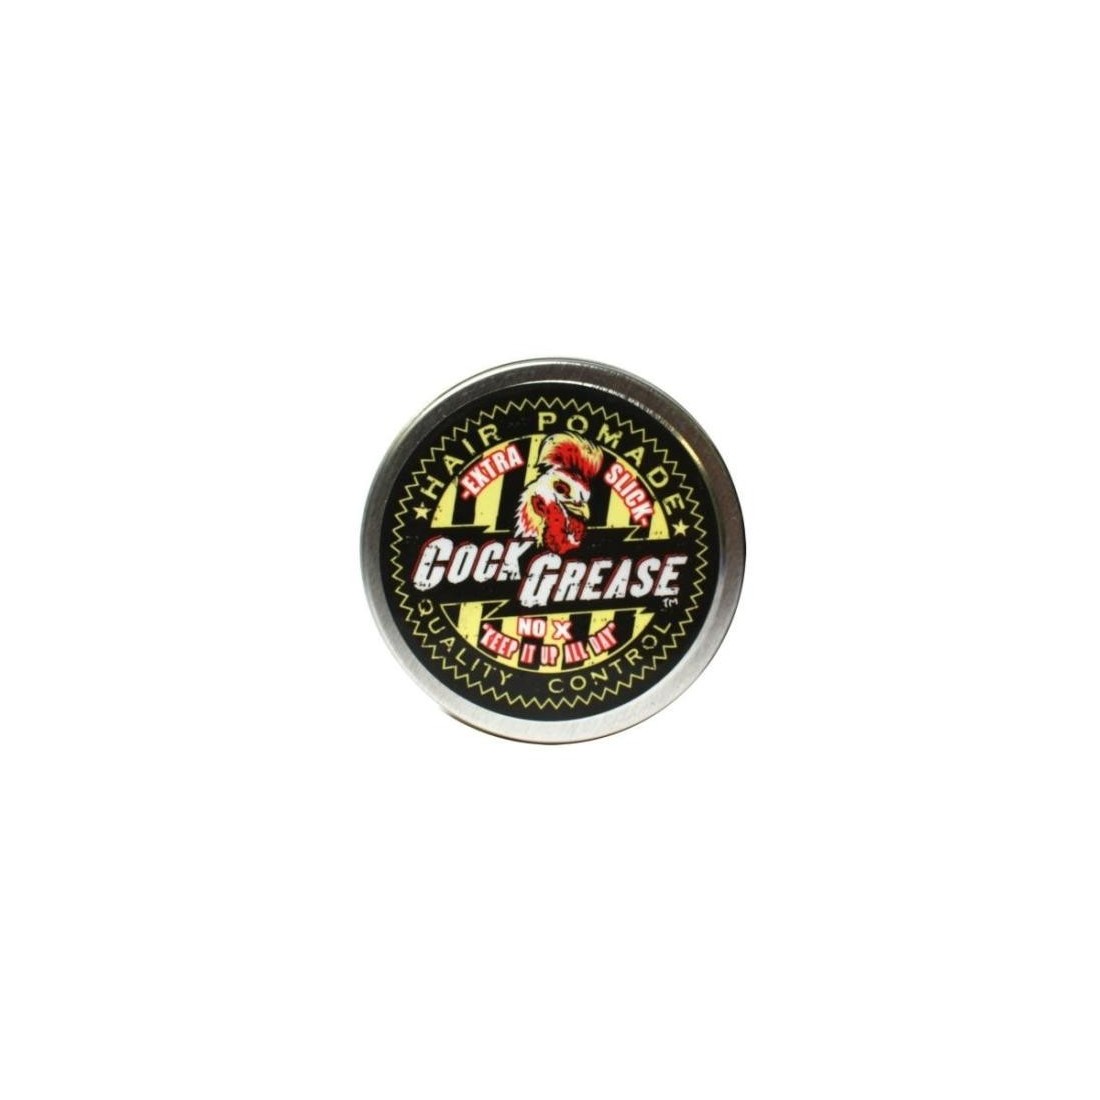 cock grease no x pomade 113gr